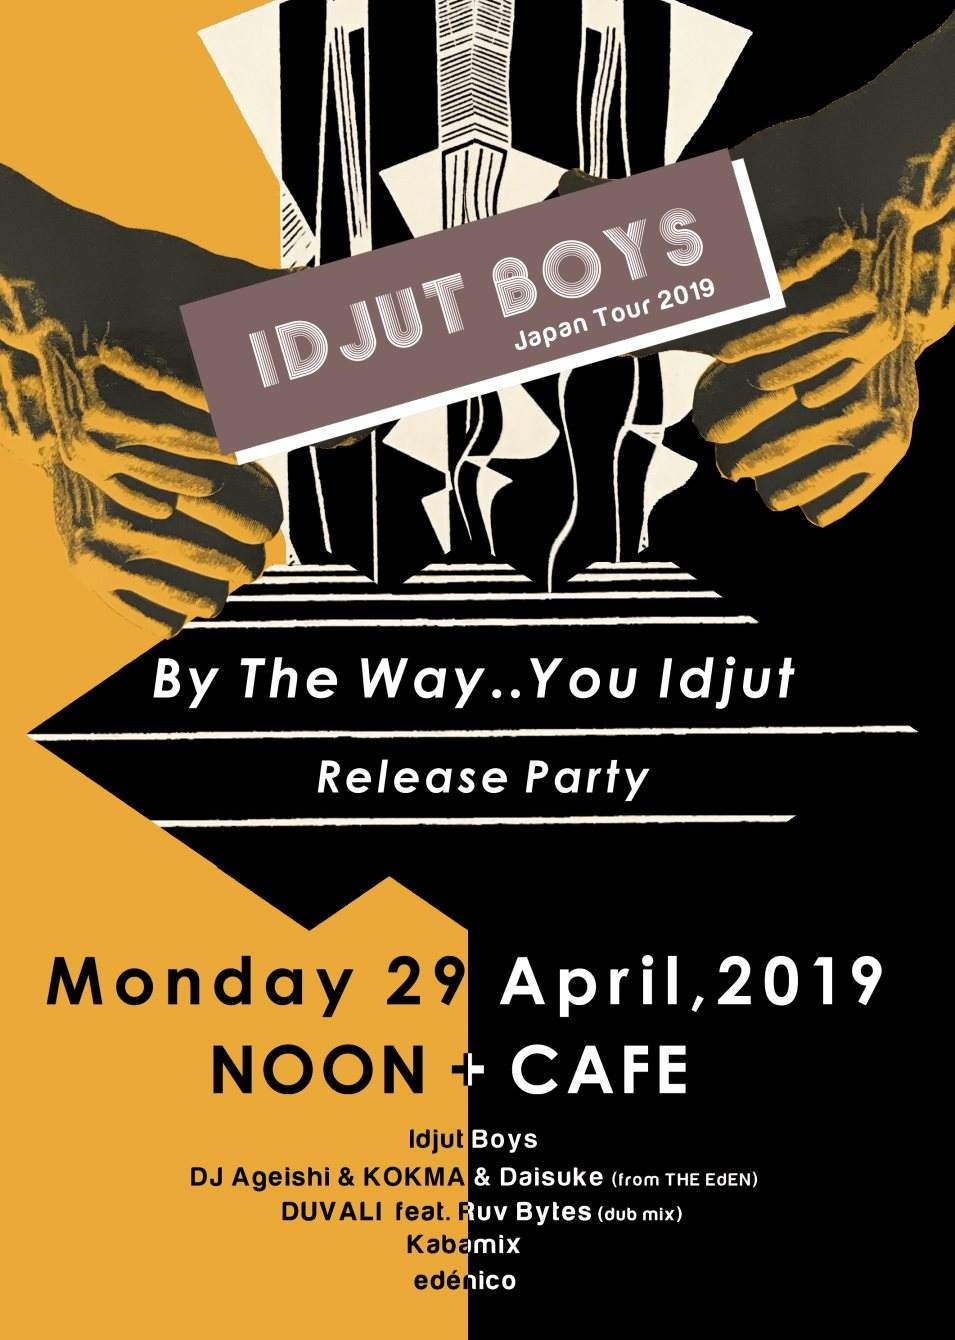 Idjut Boys Japan Tour 2019 - 'By The Way ..You Idjut' Release Party - - フライヤー表